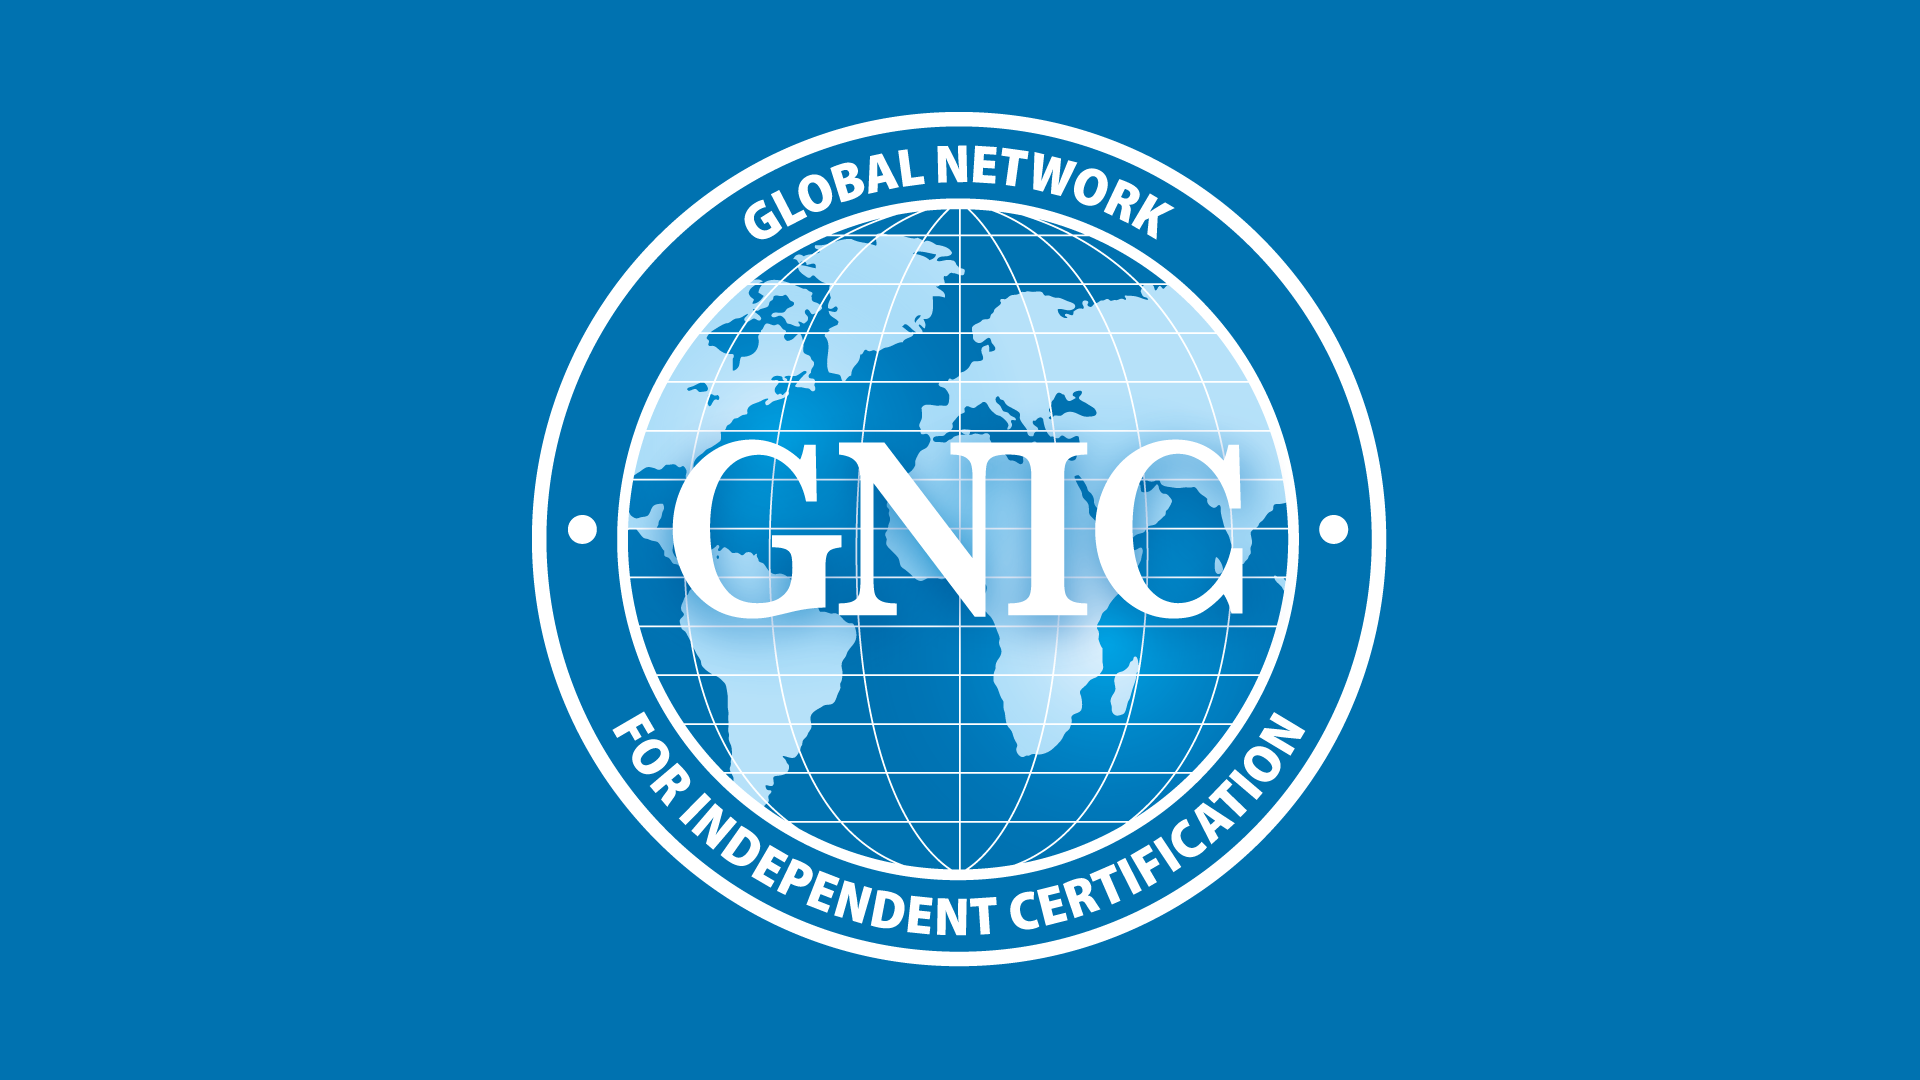 Global Network for Independent Certification